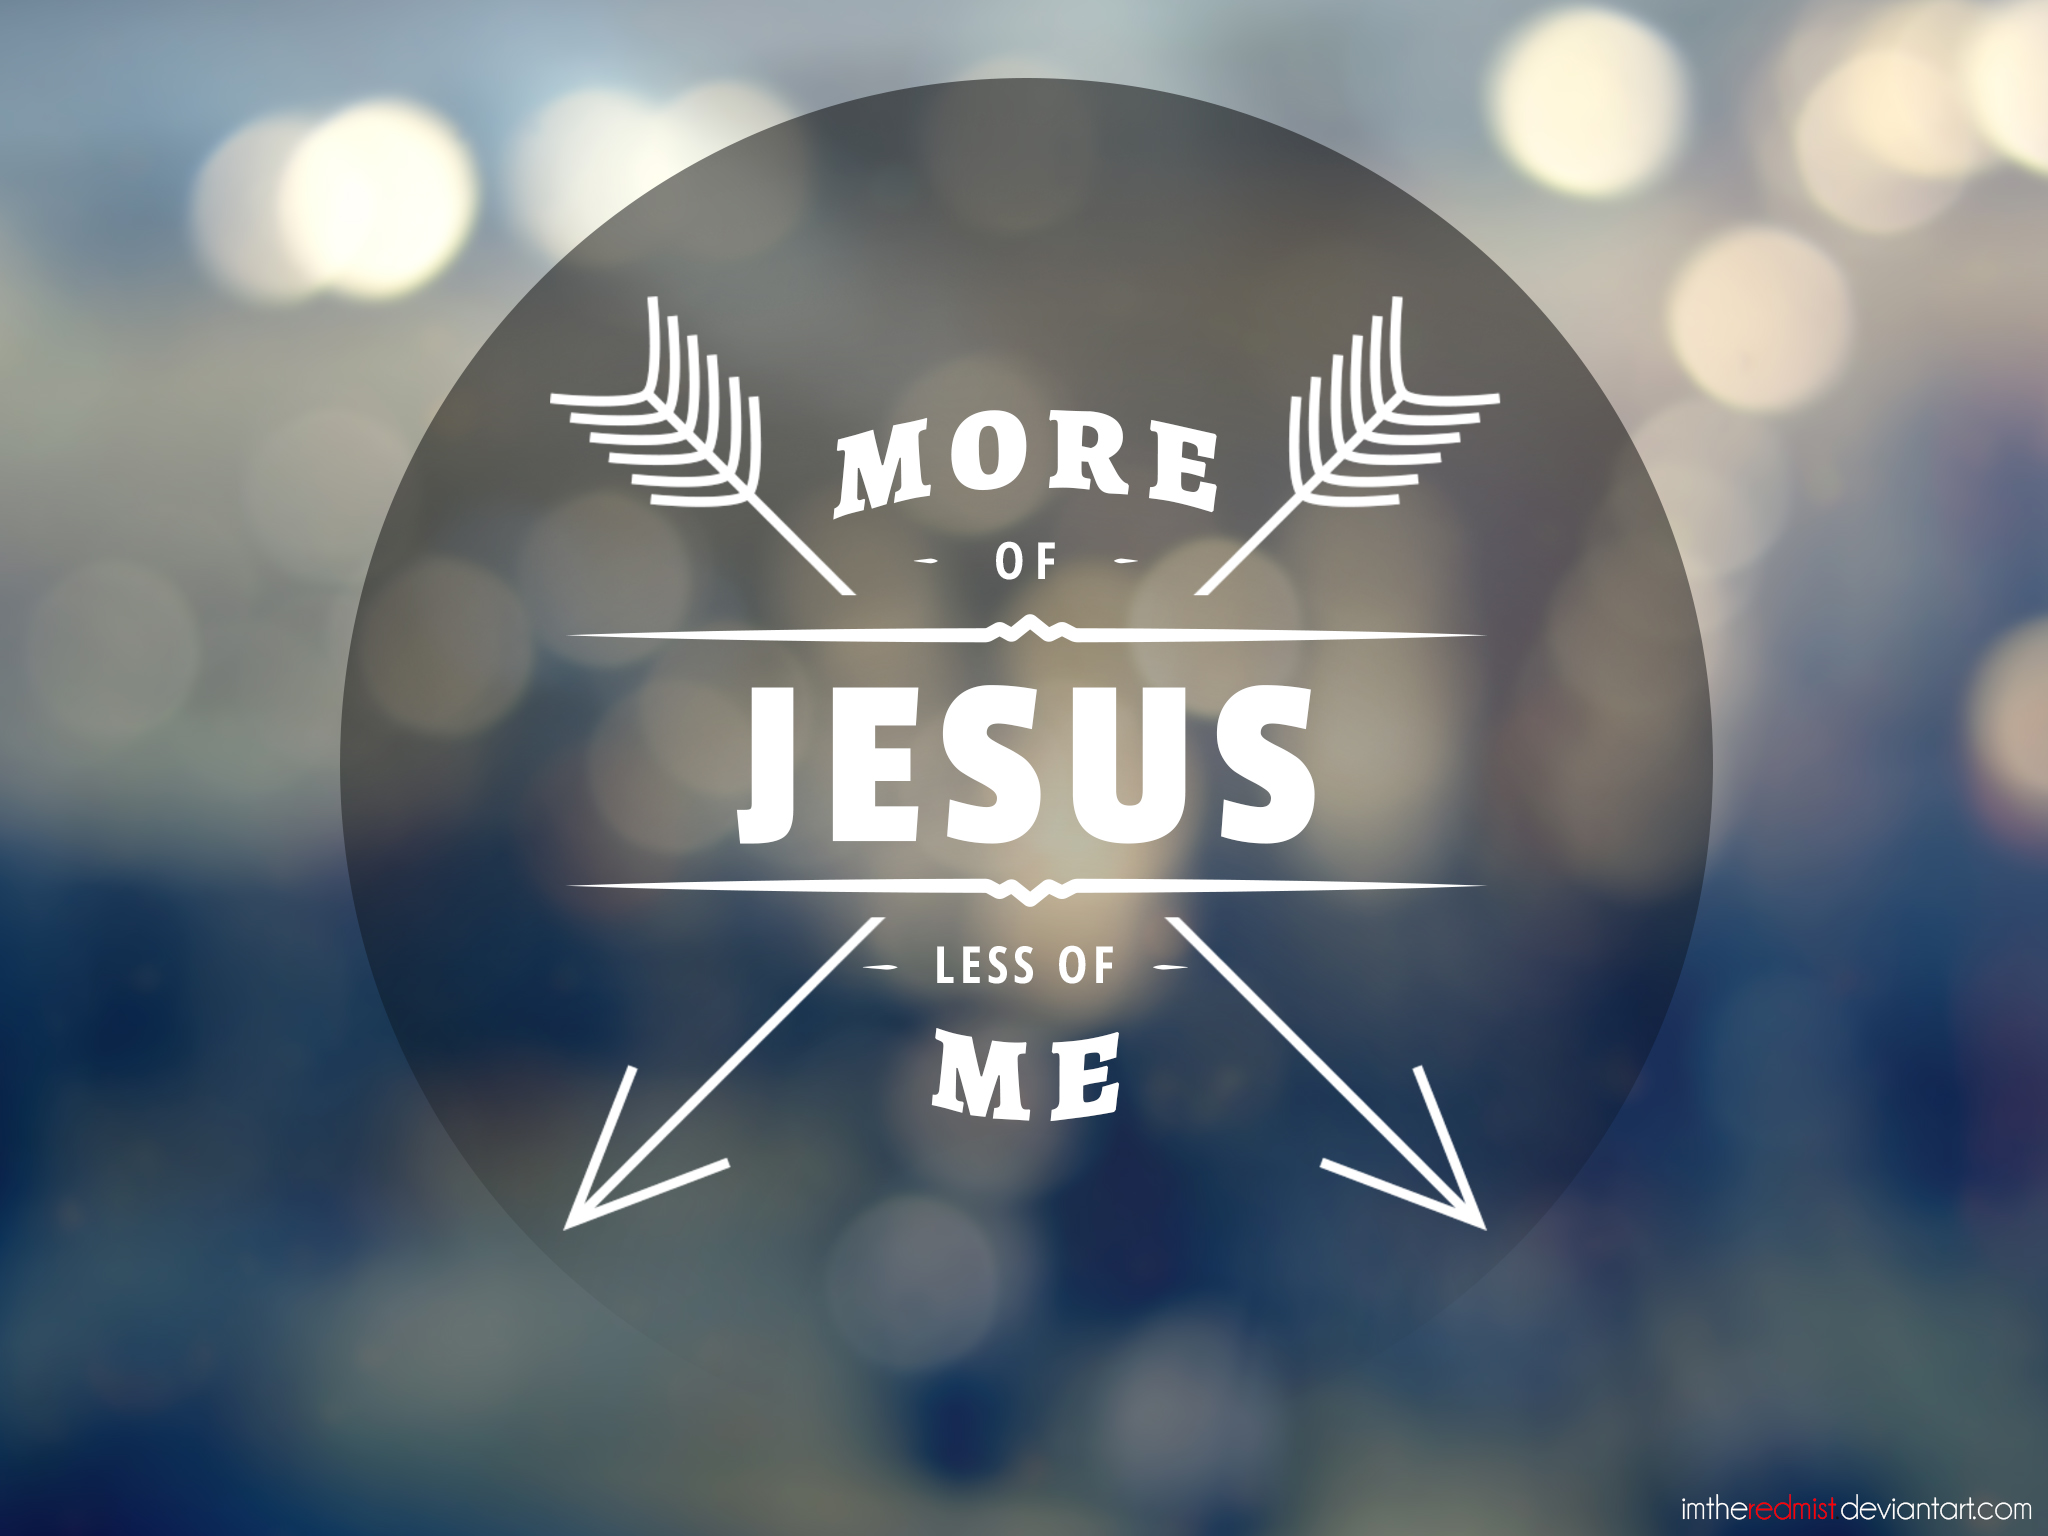 more_of_jesus__less_of_me_by_imtheredmist-d7cbe1h